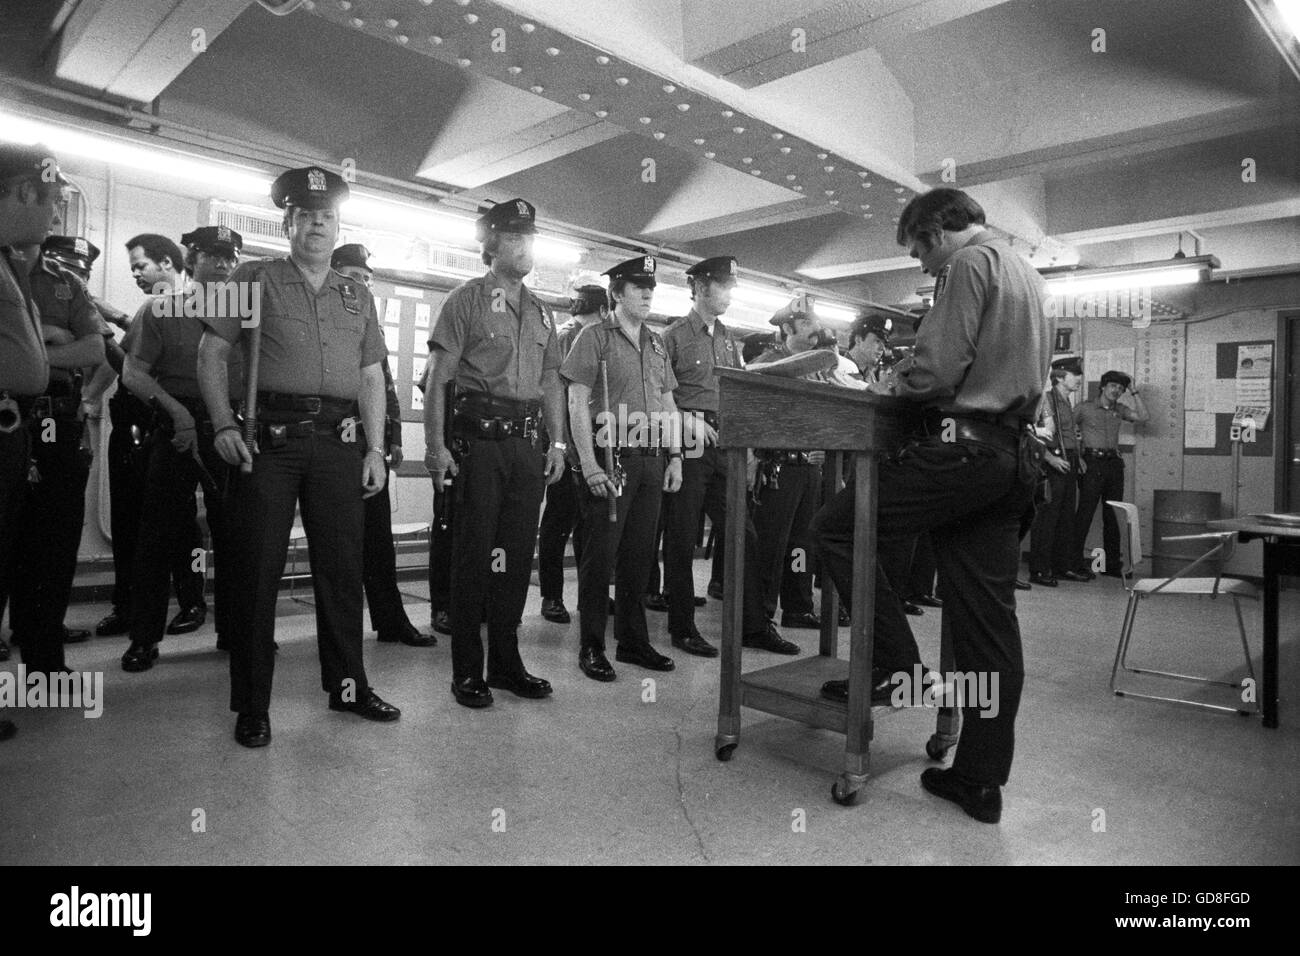 New York City Transit policiers à roll call, 1978. Banque D'Images